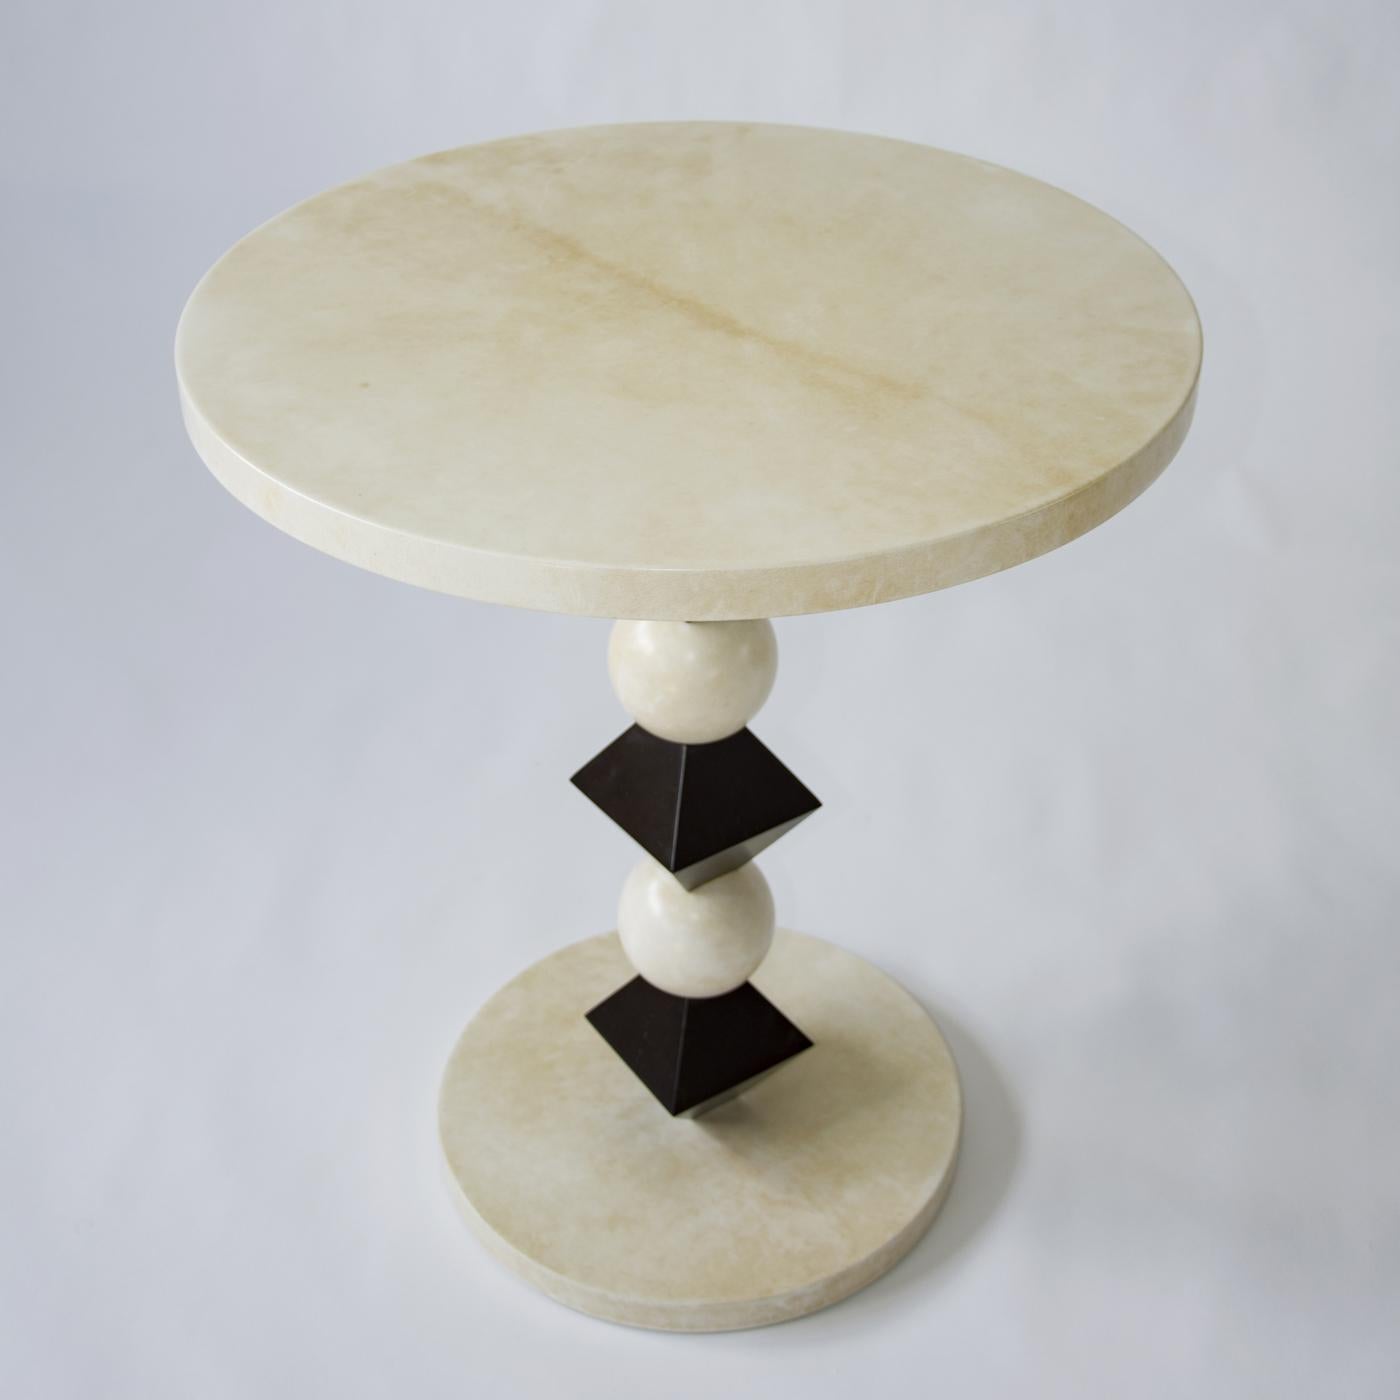 The eye-catching geometric shapes in the pedestal of this original 1980s table by Tura create an appealing aesthetic that will add unique style to a modern living room, entryway, or bedroom decor. Finished with natural parchment, the round top and